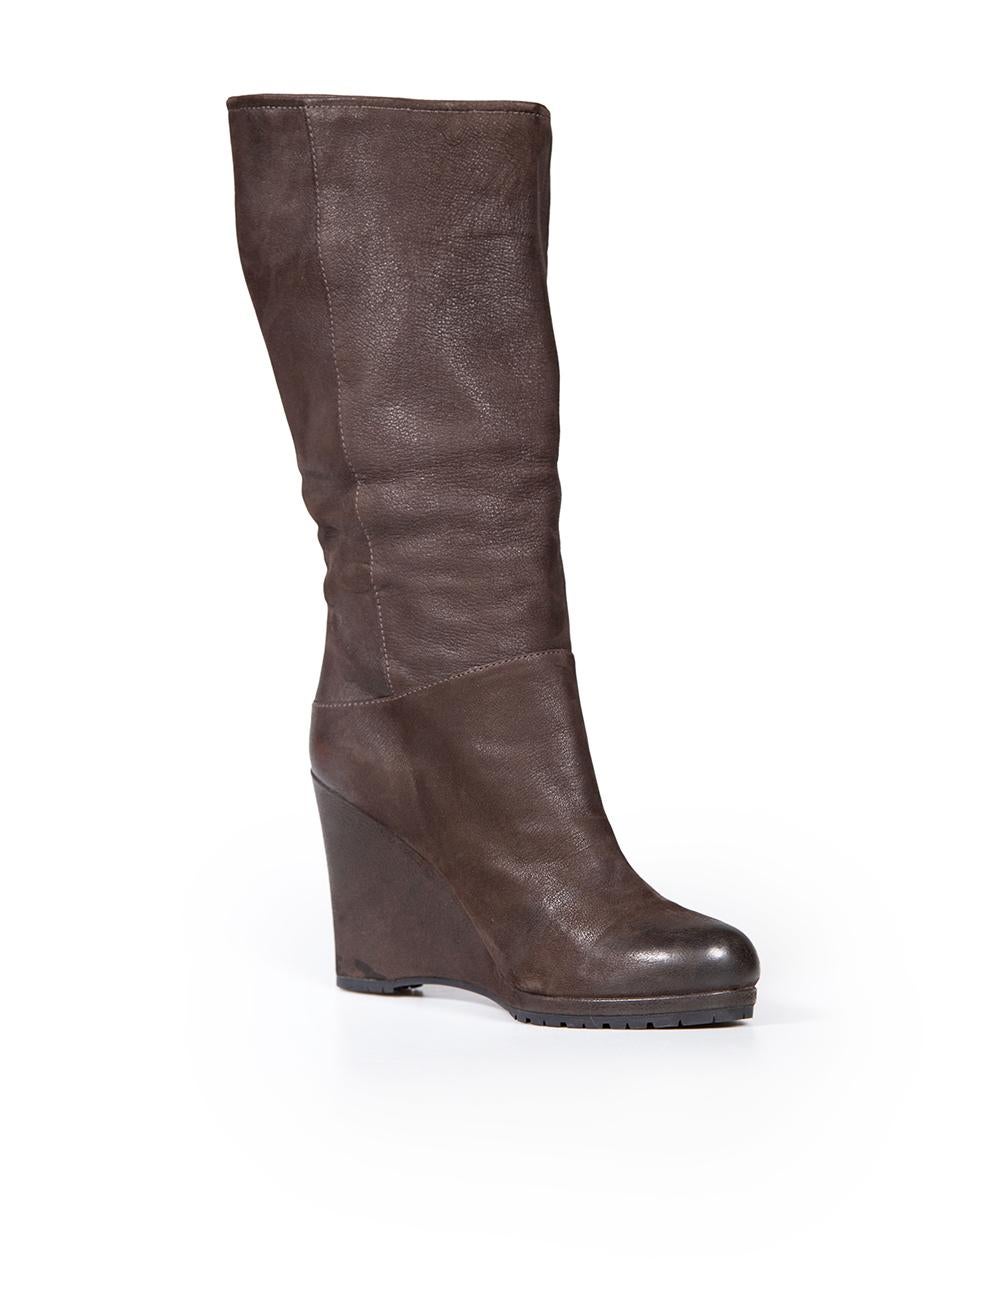 CONDITION is Very good. Minimal wear to boots is evident. Minimal wear to toe edge where there are abrasions to both shoes on this used Prada designer resale item.
 
 
 
 Details
 
 
 Brown
 
 Leather
 
 Wedge boots
 
 Mid calf
 
 High heel
 
 Round